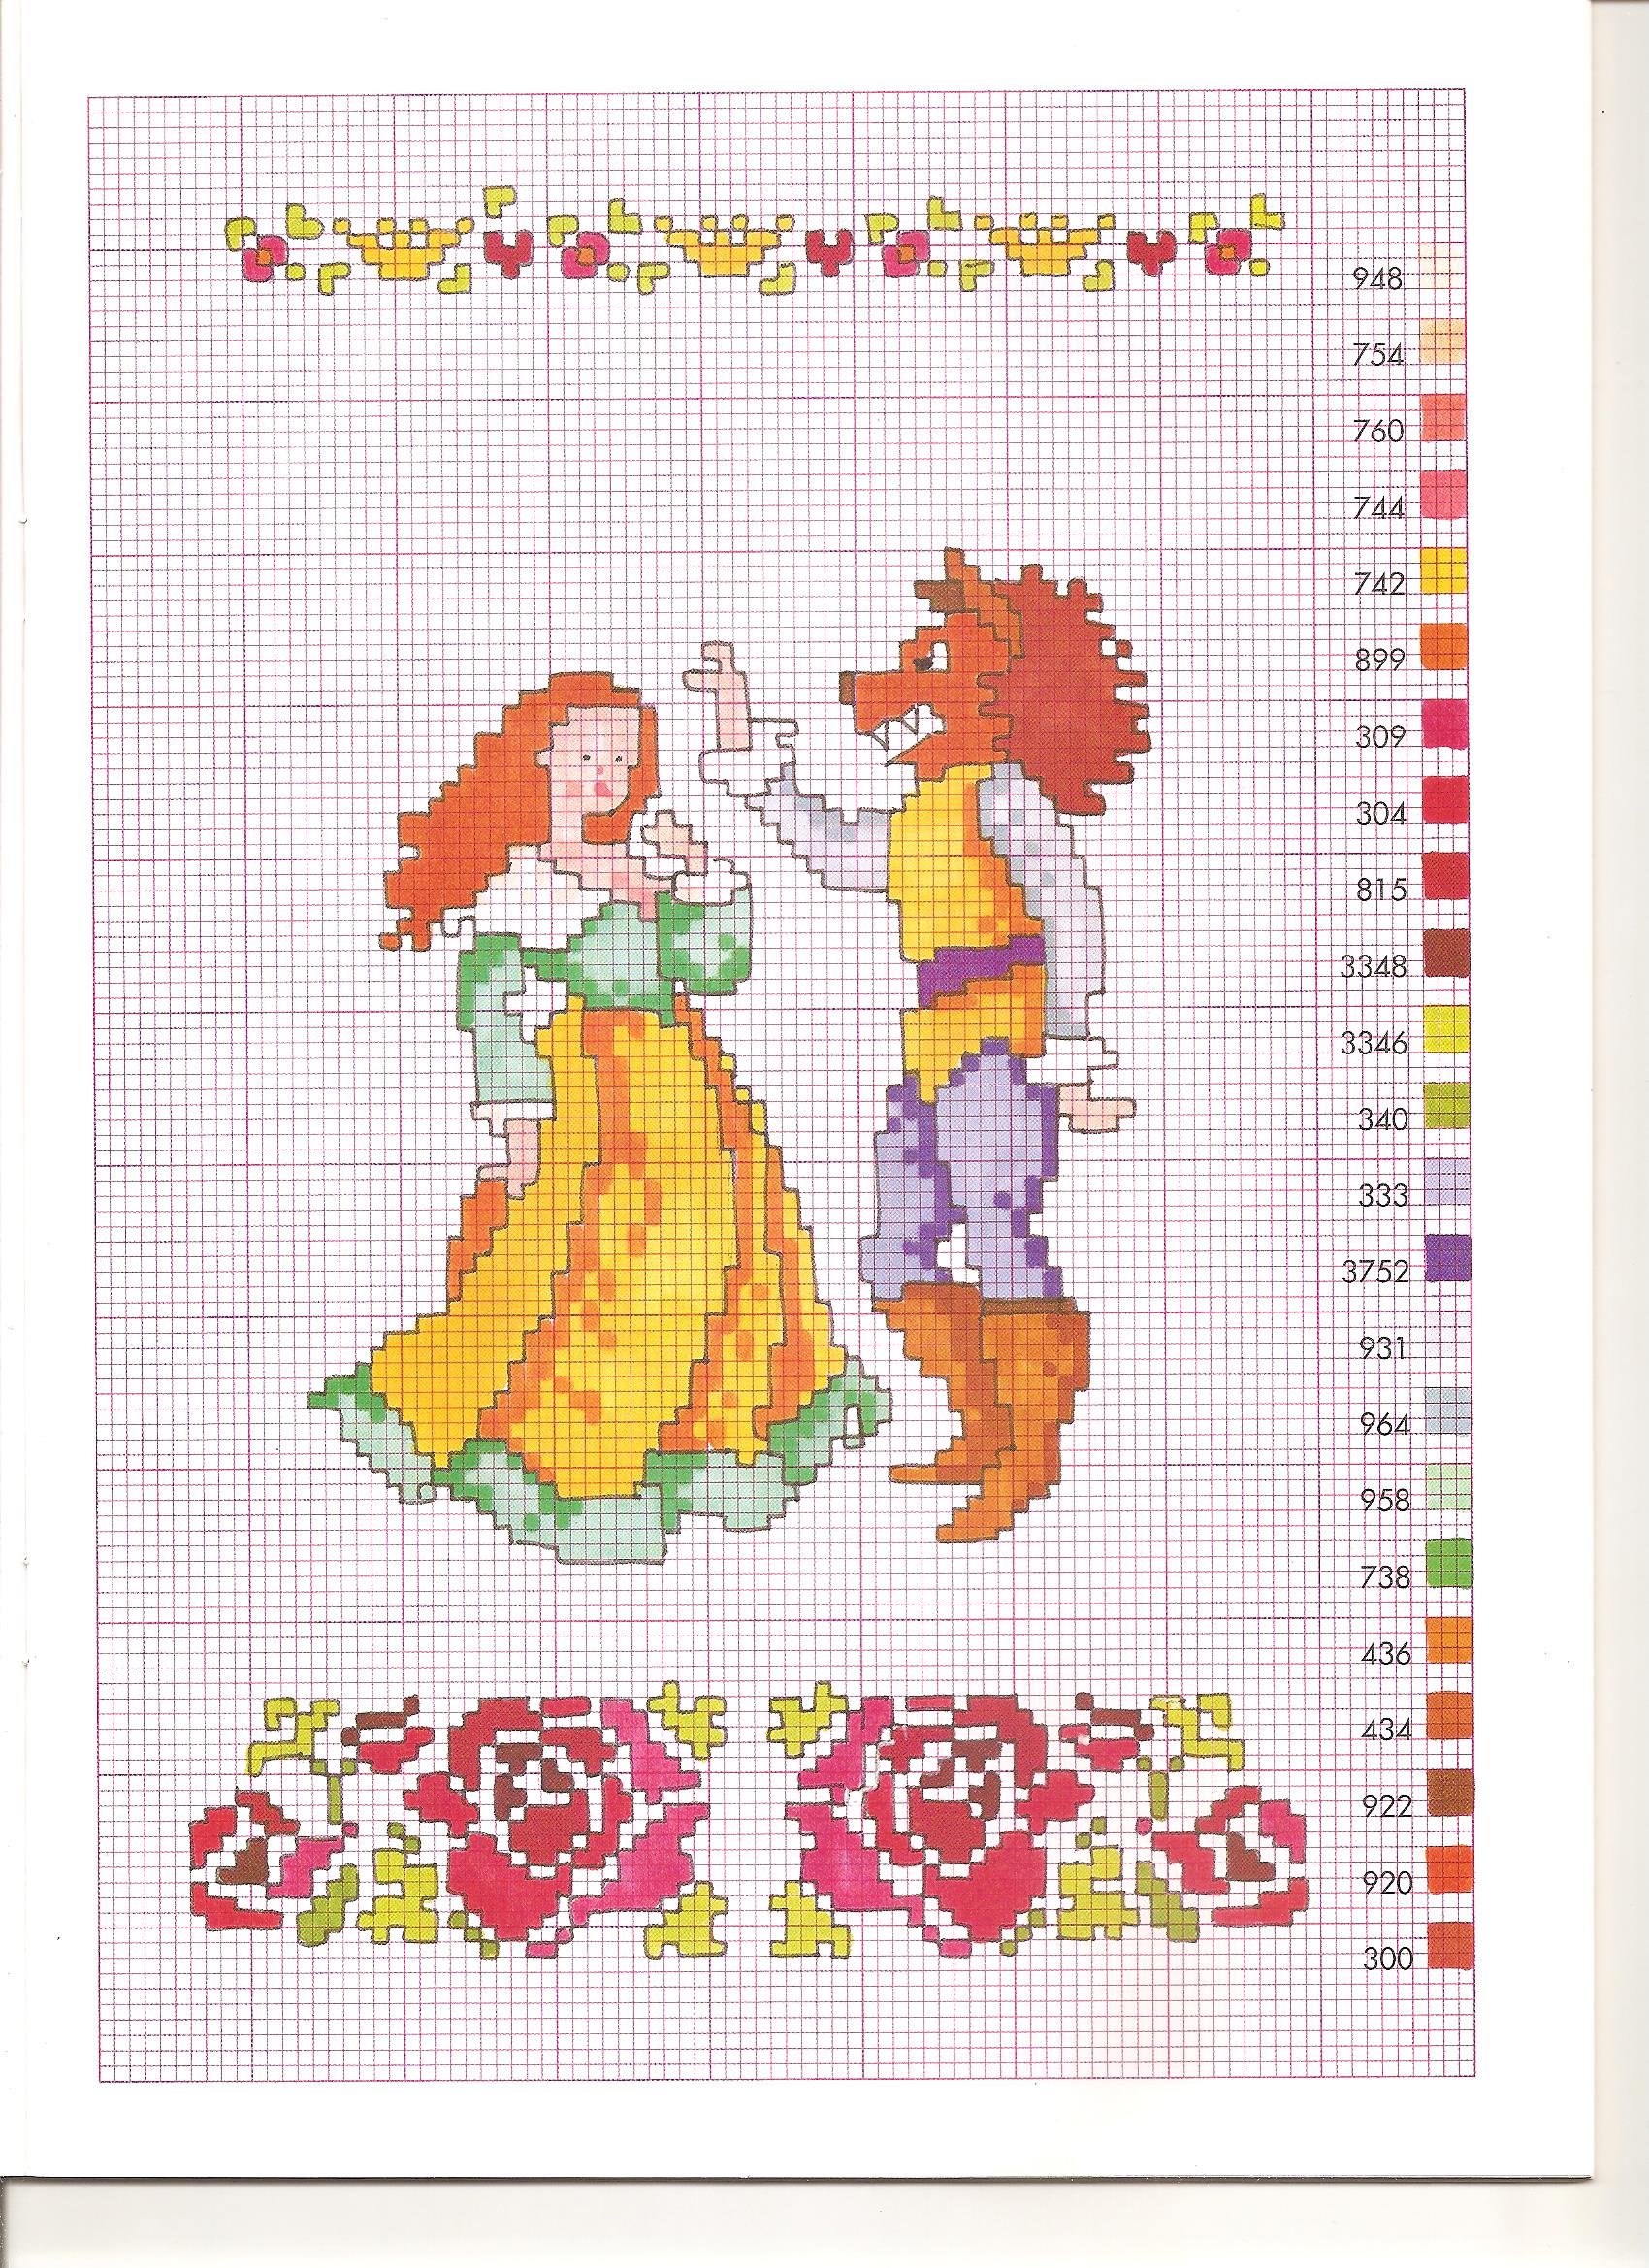 The Beauty and The Beast cross stitch pattern